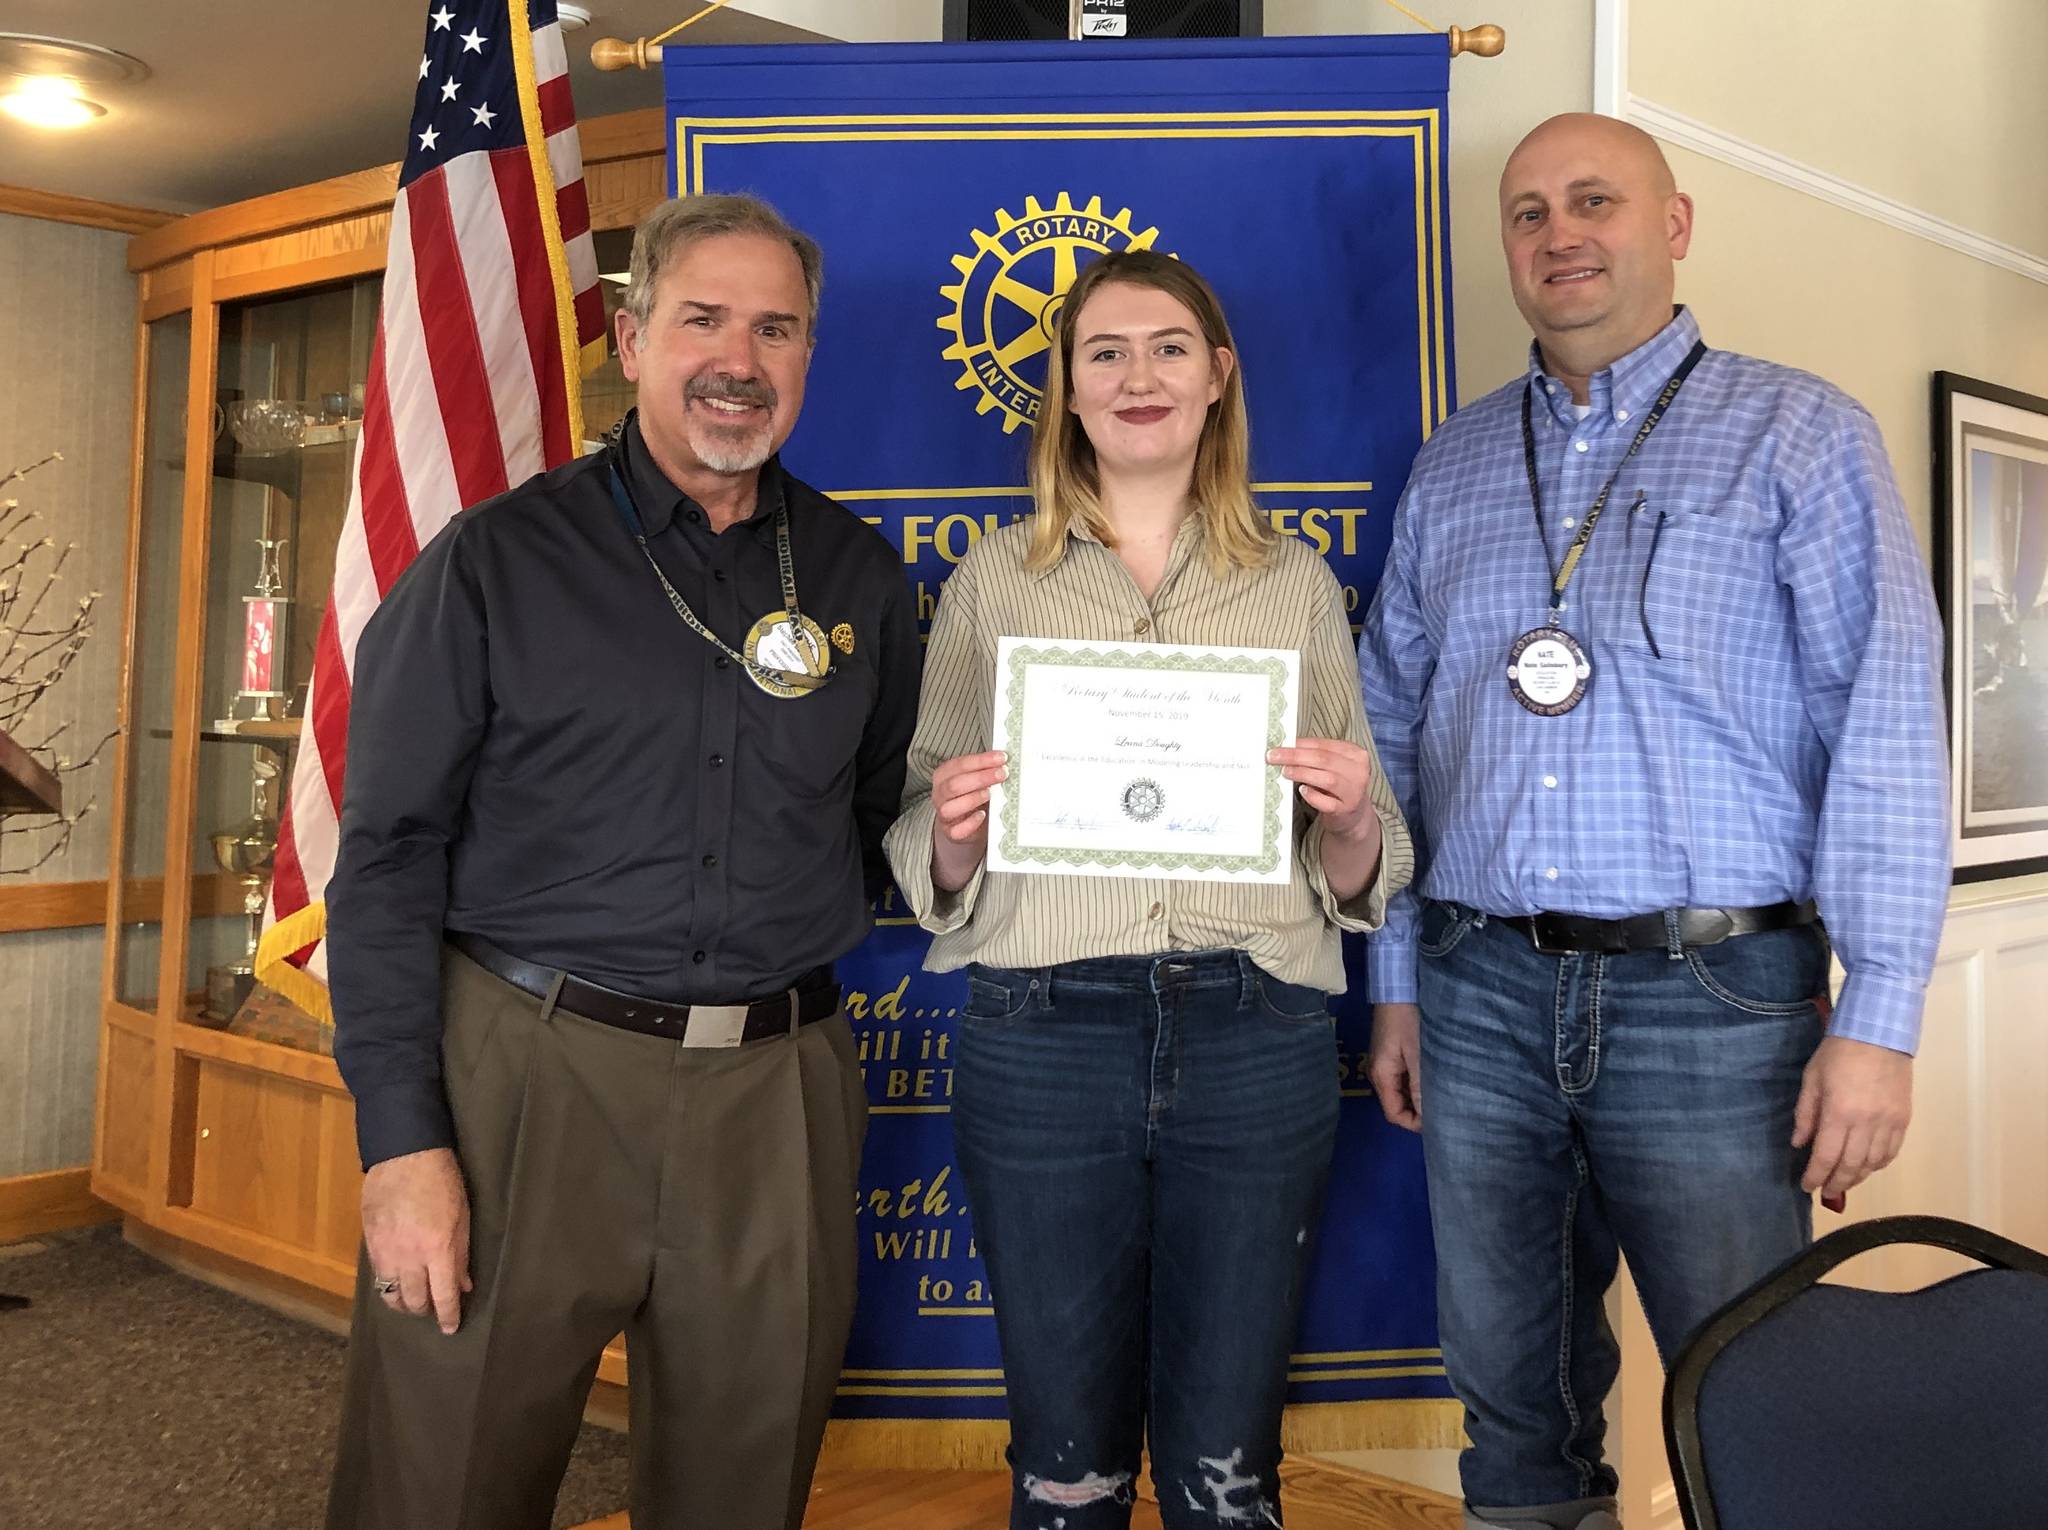 Leana Doughty, center, Rotary of Oak Harbor’s Student of the Month for November, poses with club President Steve Schwalbe, at left, and Oak Harbor High School Principal Nate Salisbury.